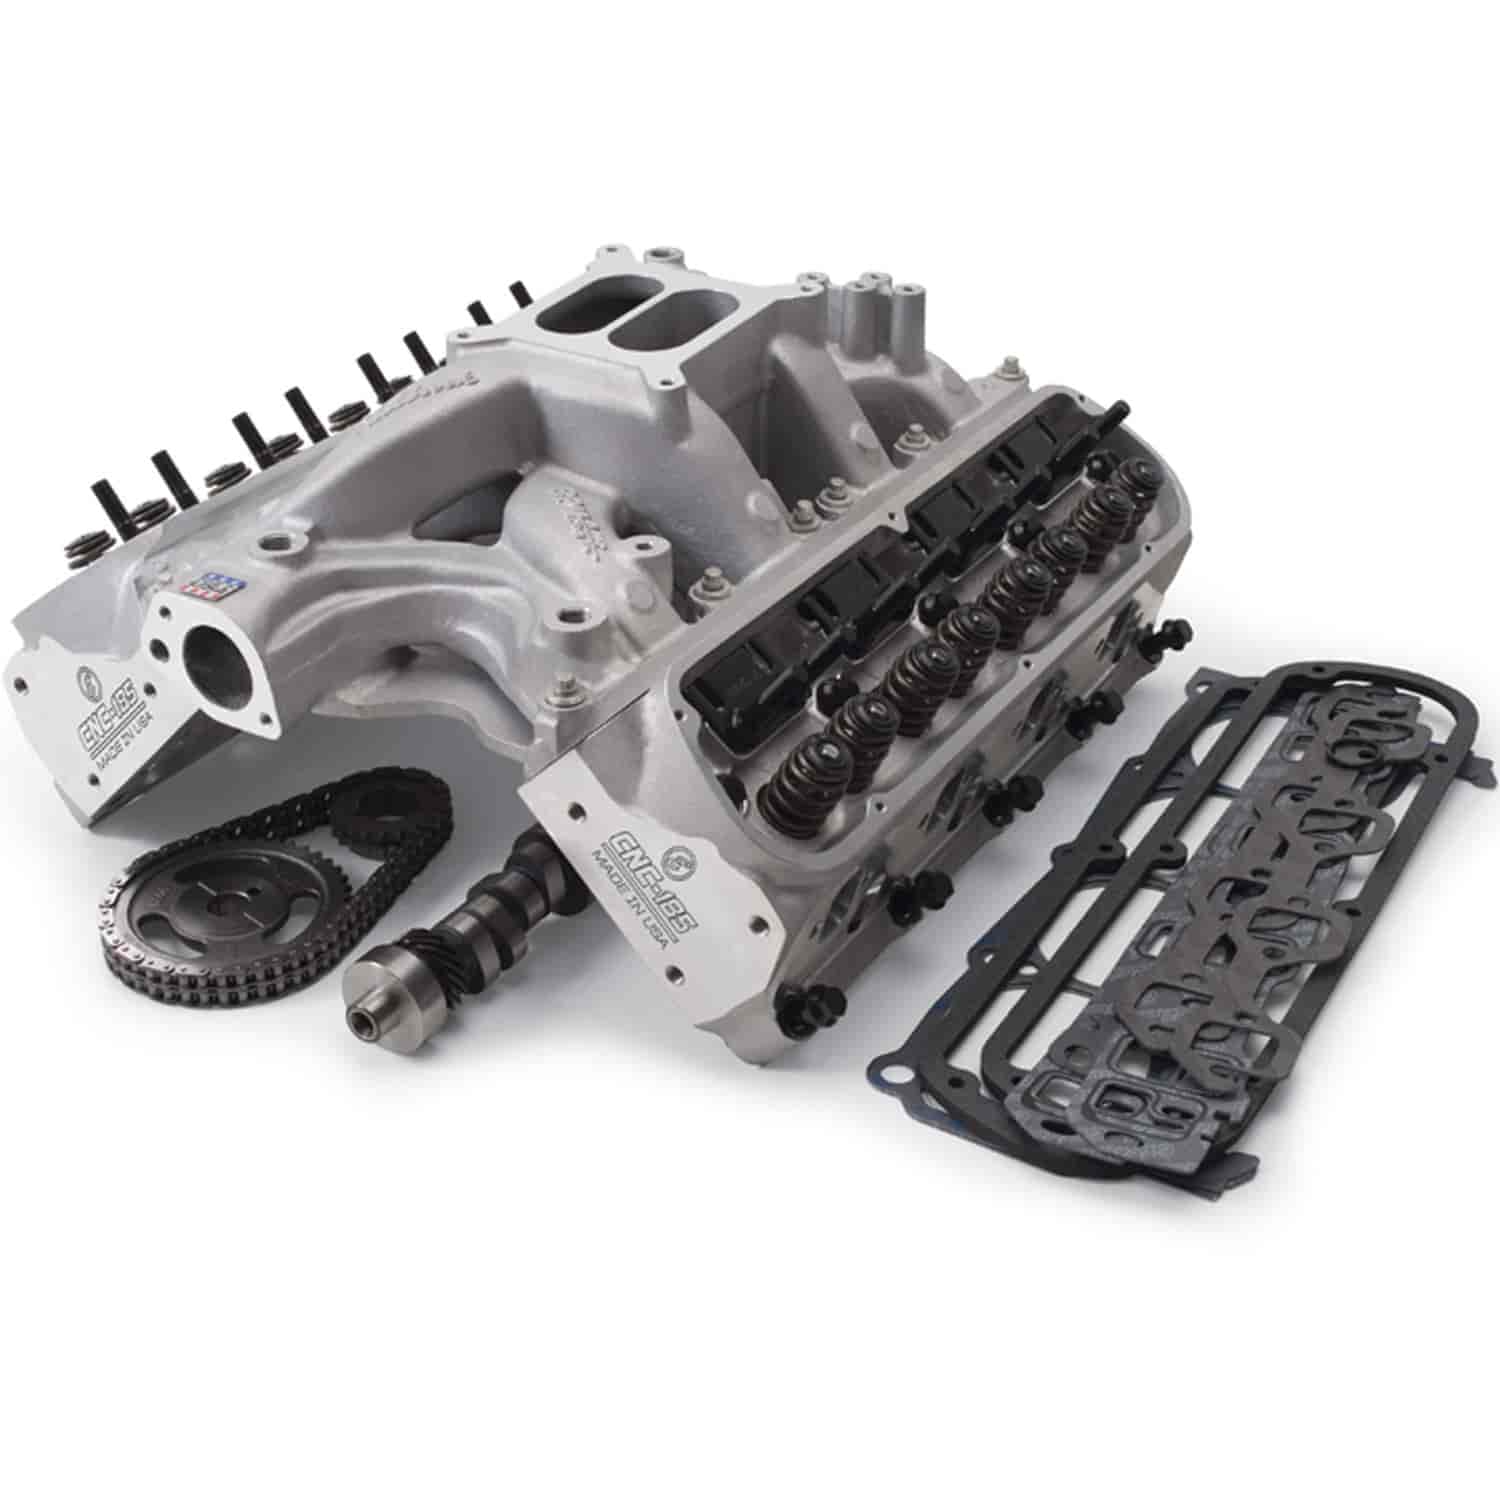 RPM Power Package Top End Kit for 1969-1995